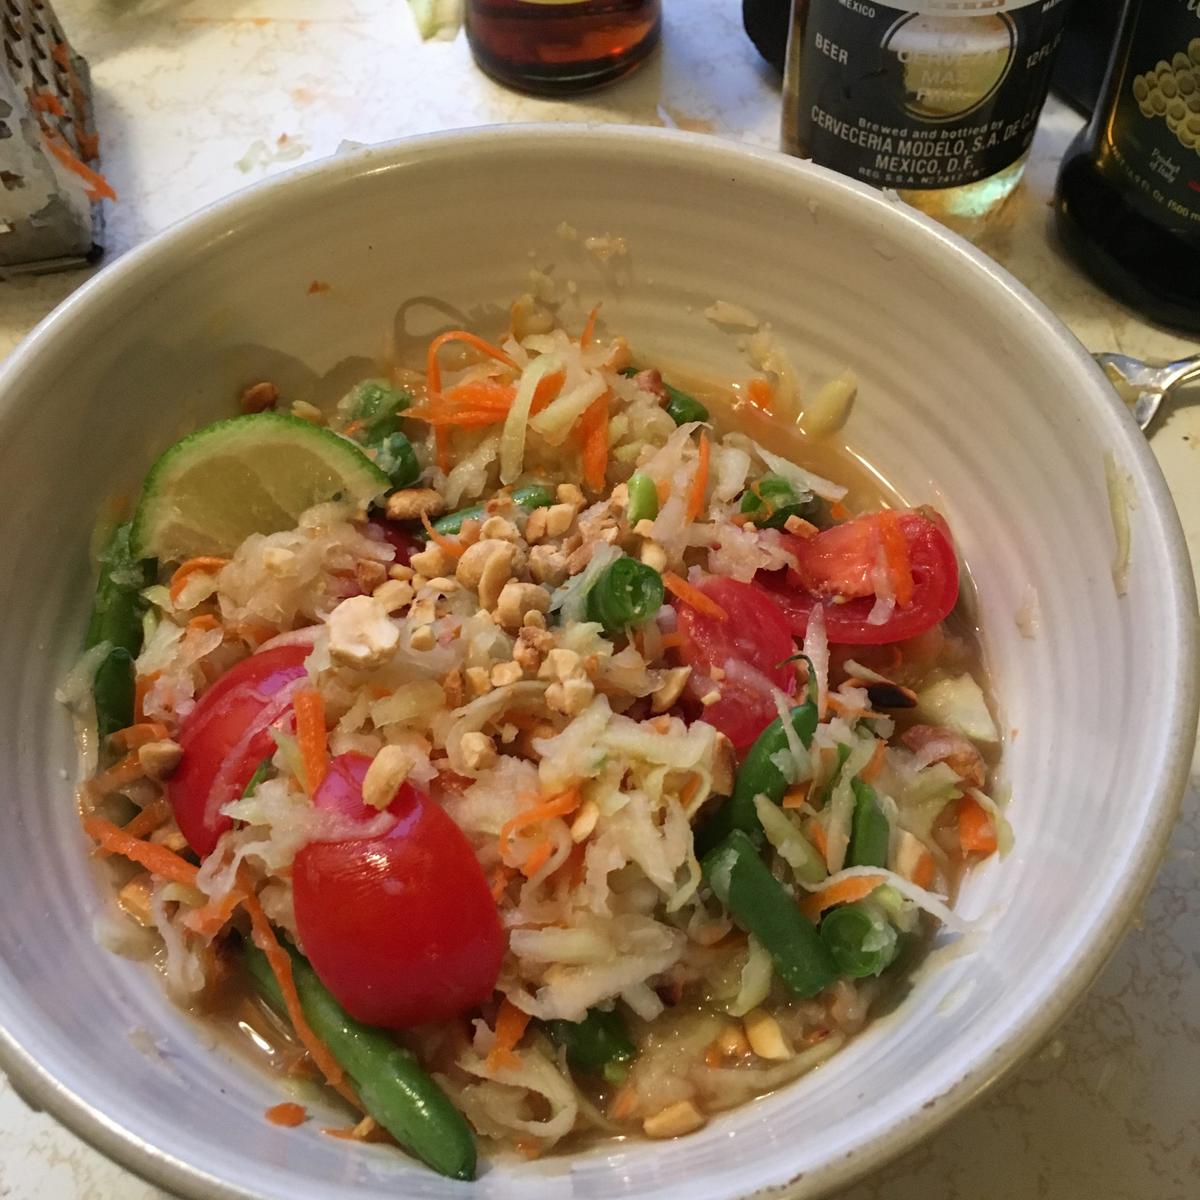 Kohlrabi makes a great swap for green papaya in this sour, spicy, savory salad. (Ari LeVaux)